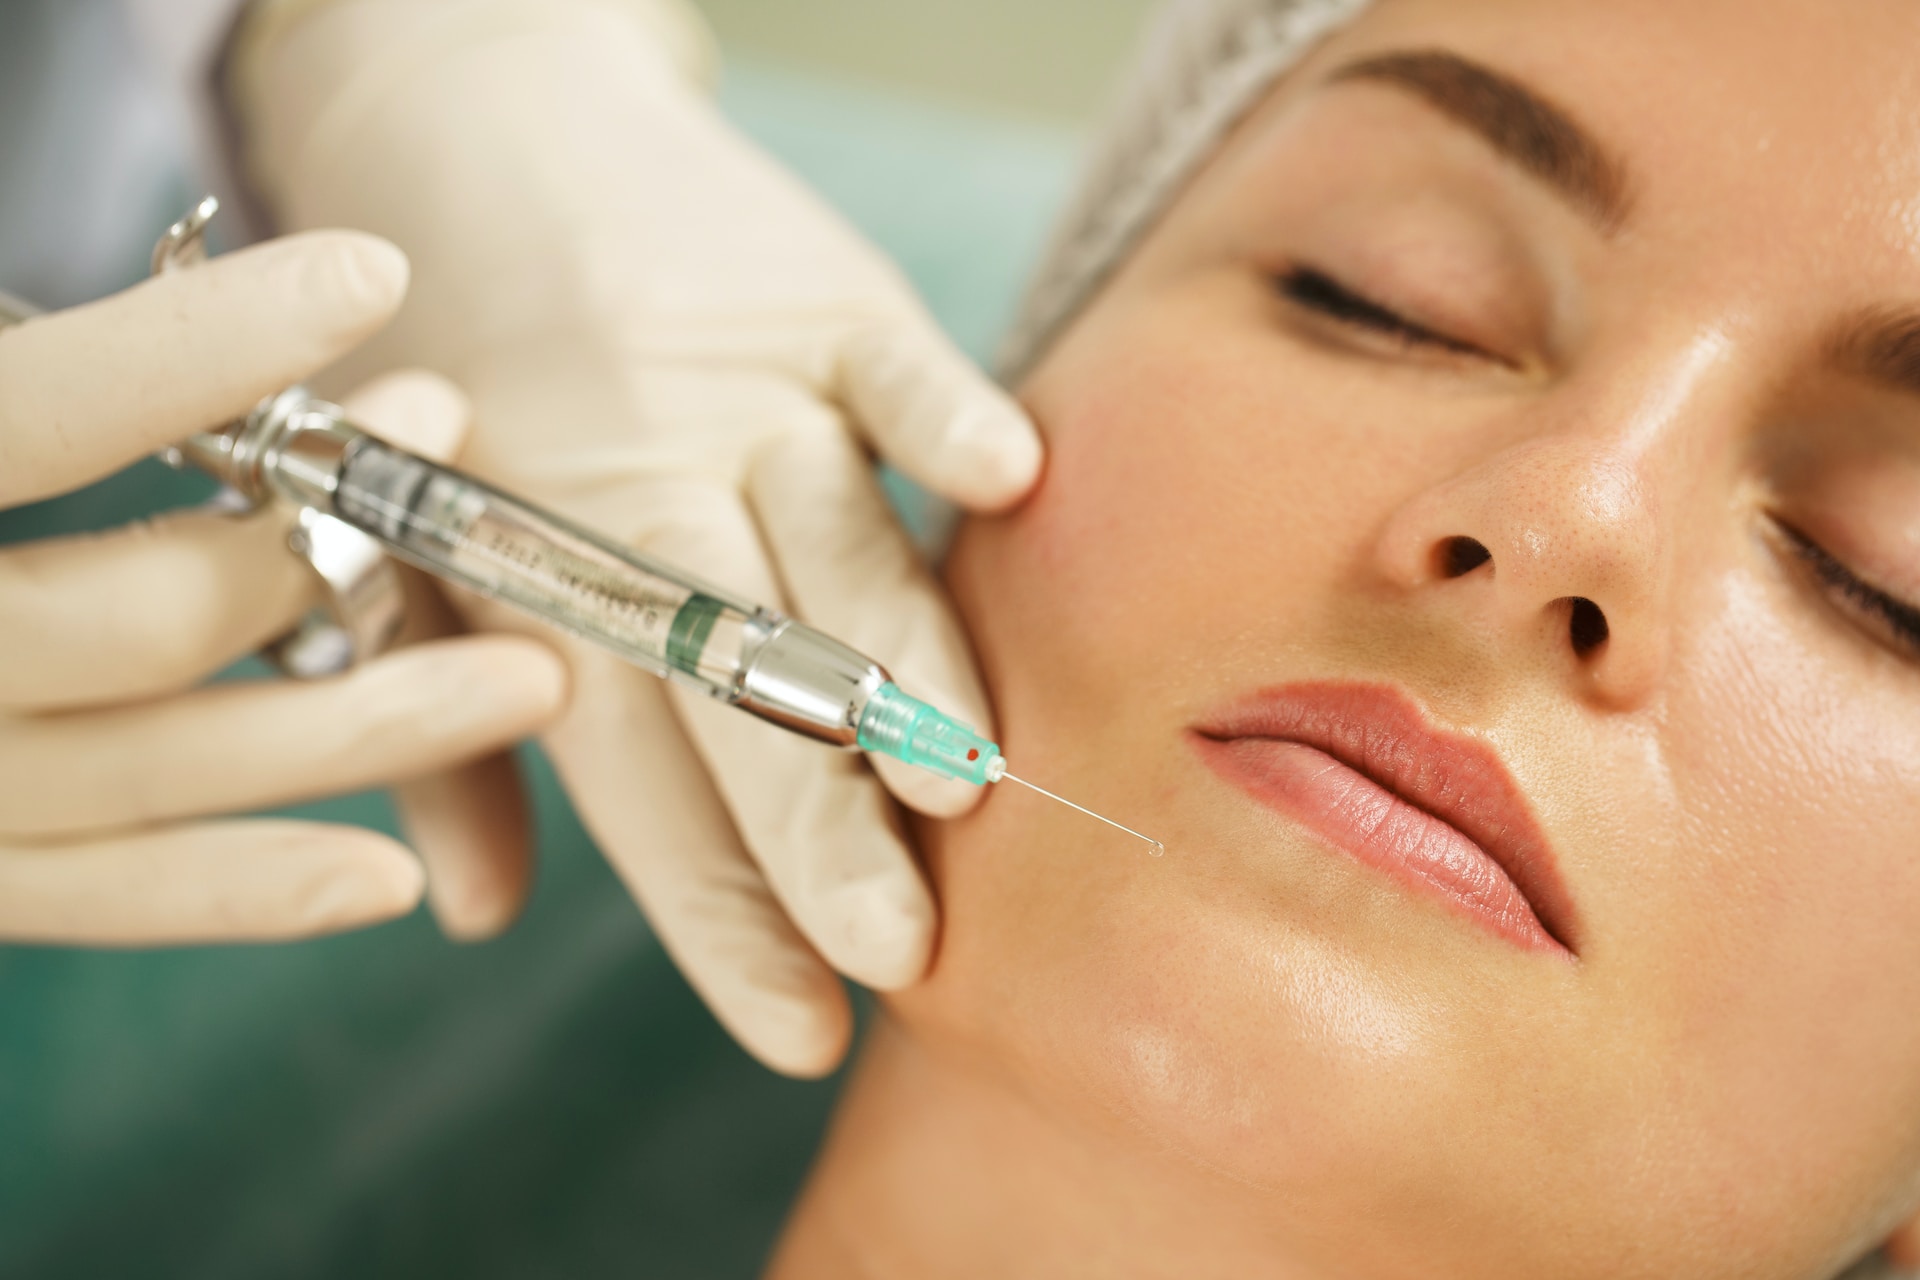 The Science Behind Injectables: What Patients Need to Know